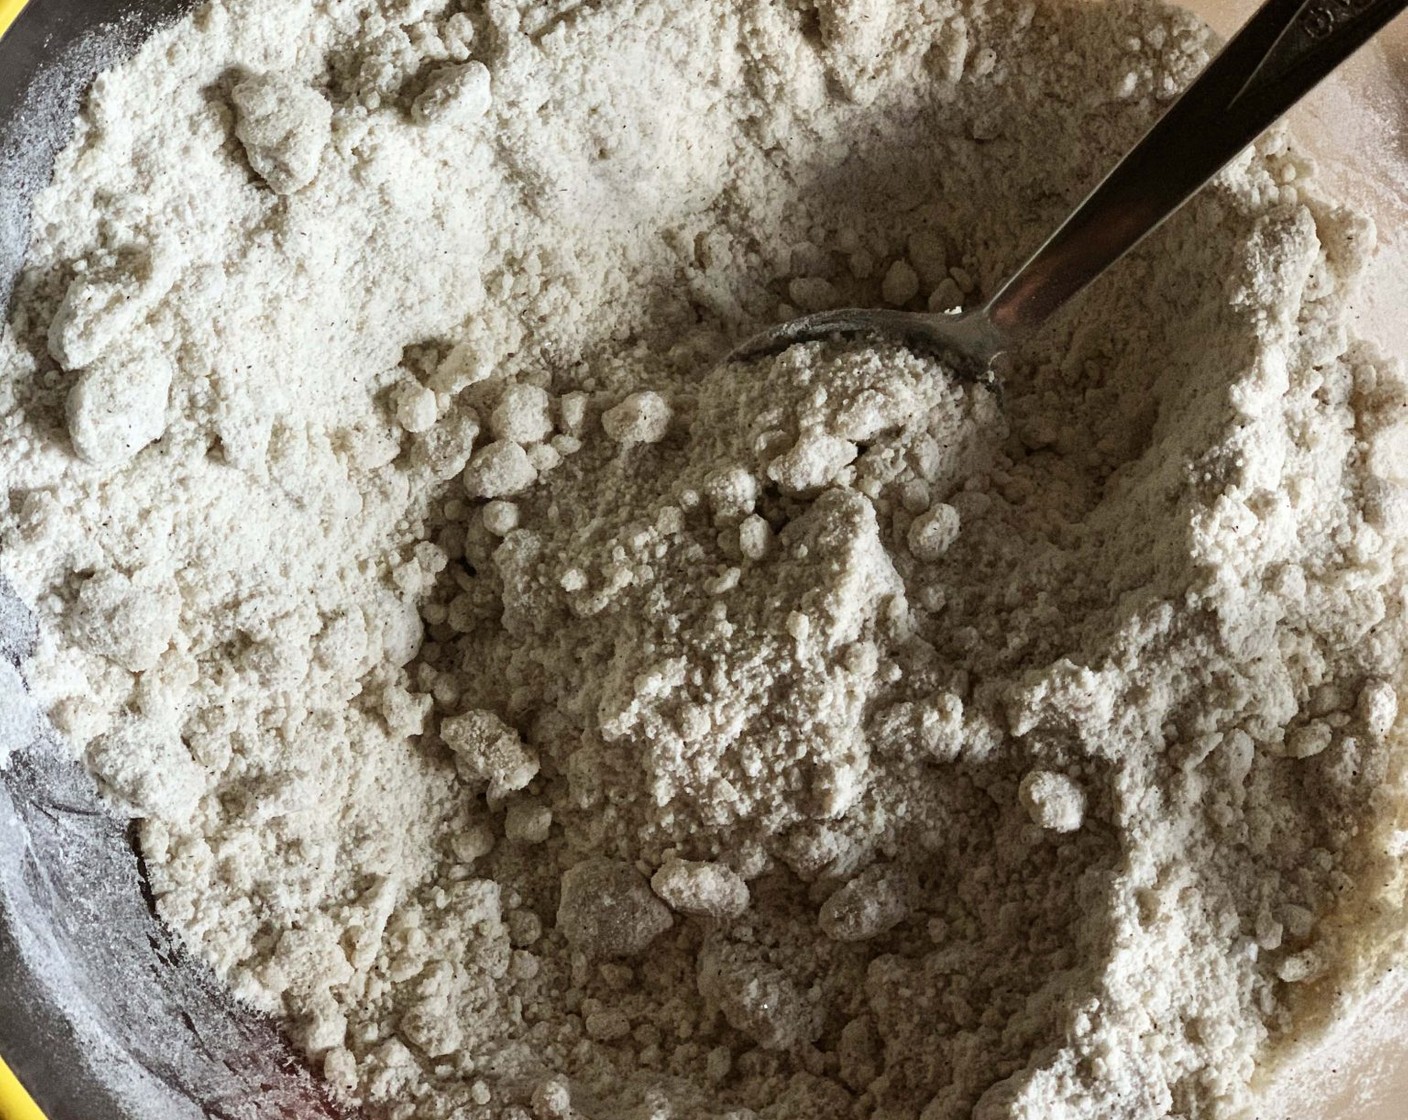 step 1 In a large bowl combine Buckwheat Flour (1 cup), Rice Flour (1 cup), Coconut Sugar (1/3 cup), Lemon (1), Xanthan Gum (1/2 tsp), Cream of Tartar (1 tsp), and Corn Starch (1/2 cup). Pour in Coconut Oil (2 oz) and stir with a fork.